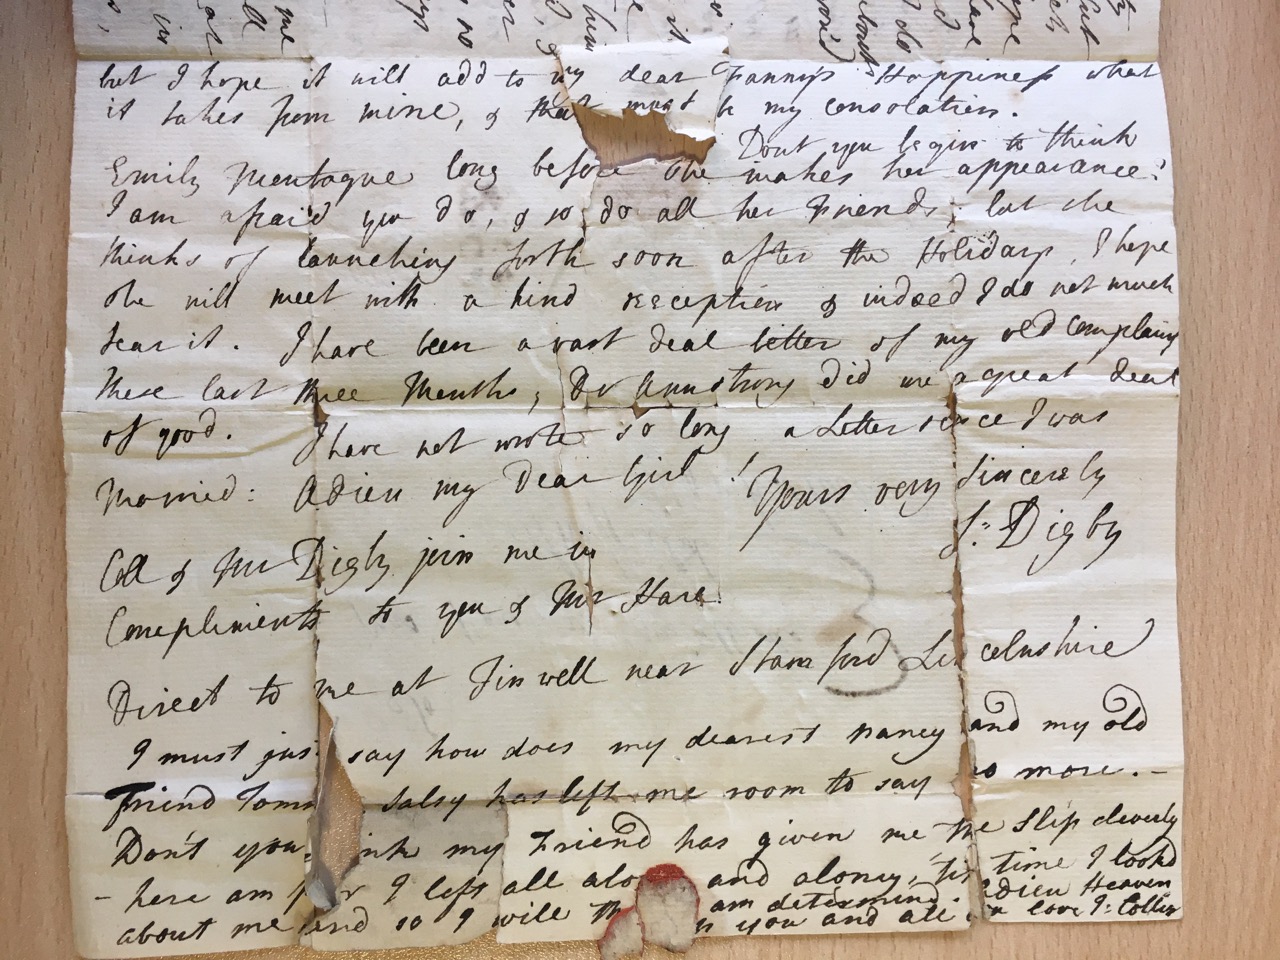 Image #3 of letter: S[ally] Digby and I Collier to Ann Hare, 27 December 1768